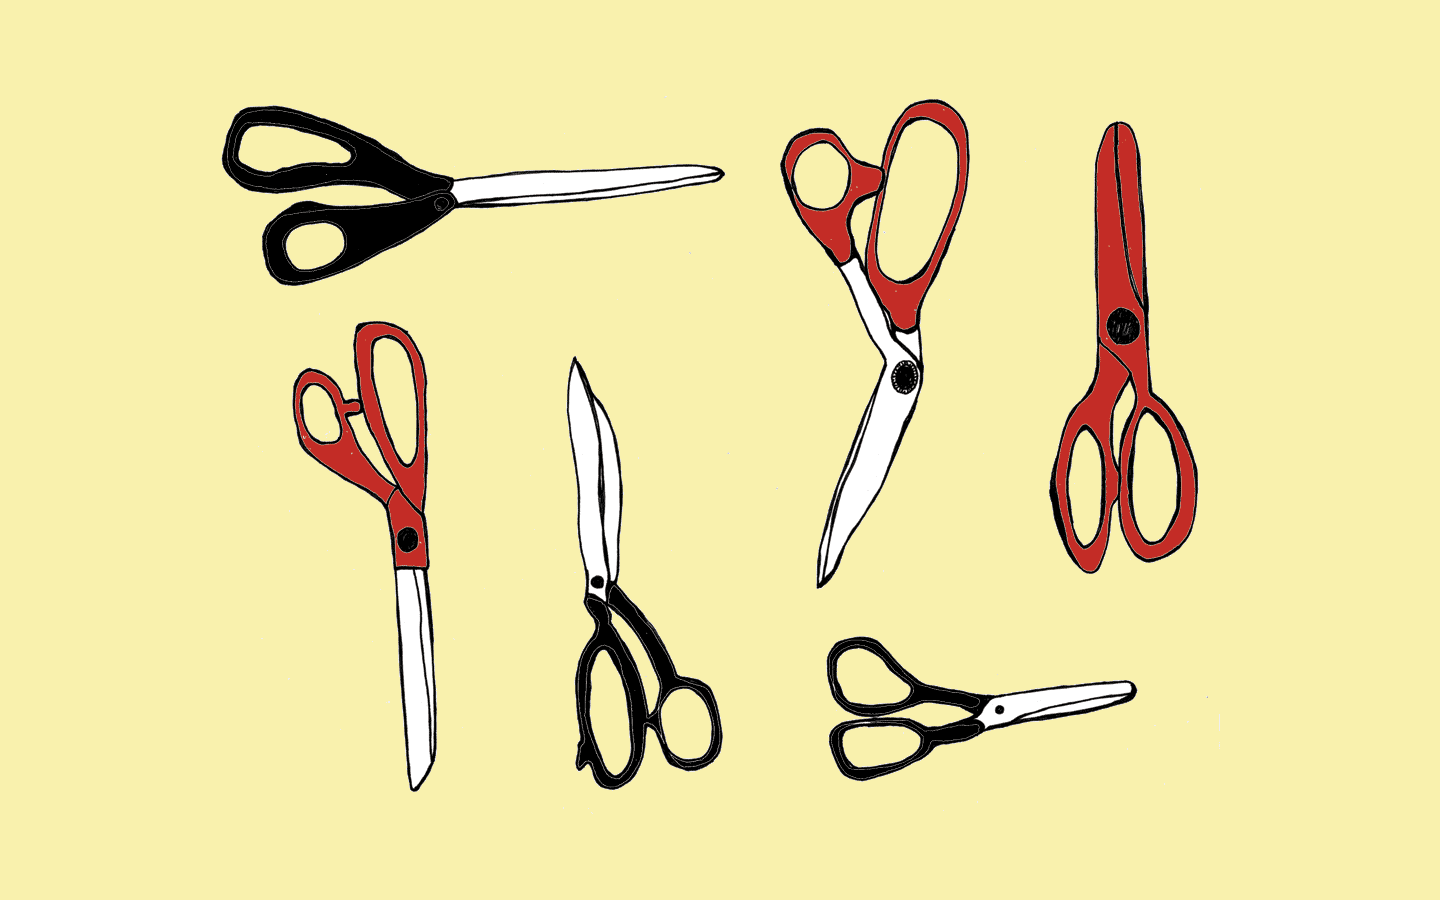 An illustration of several pairs of scissors on a pale yellow background.